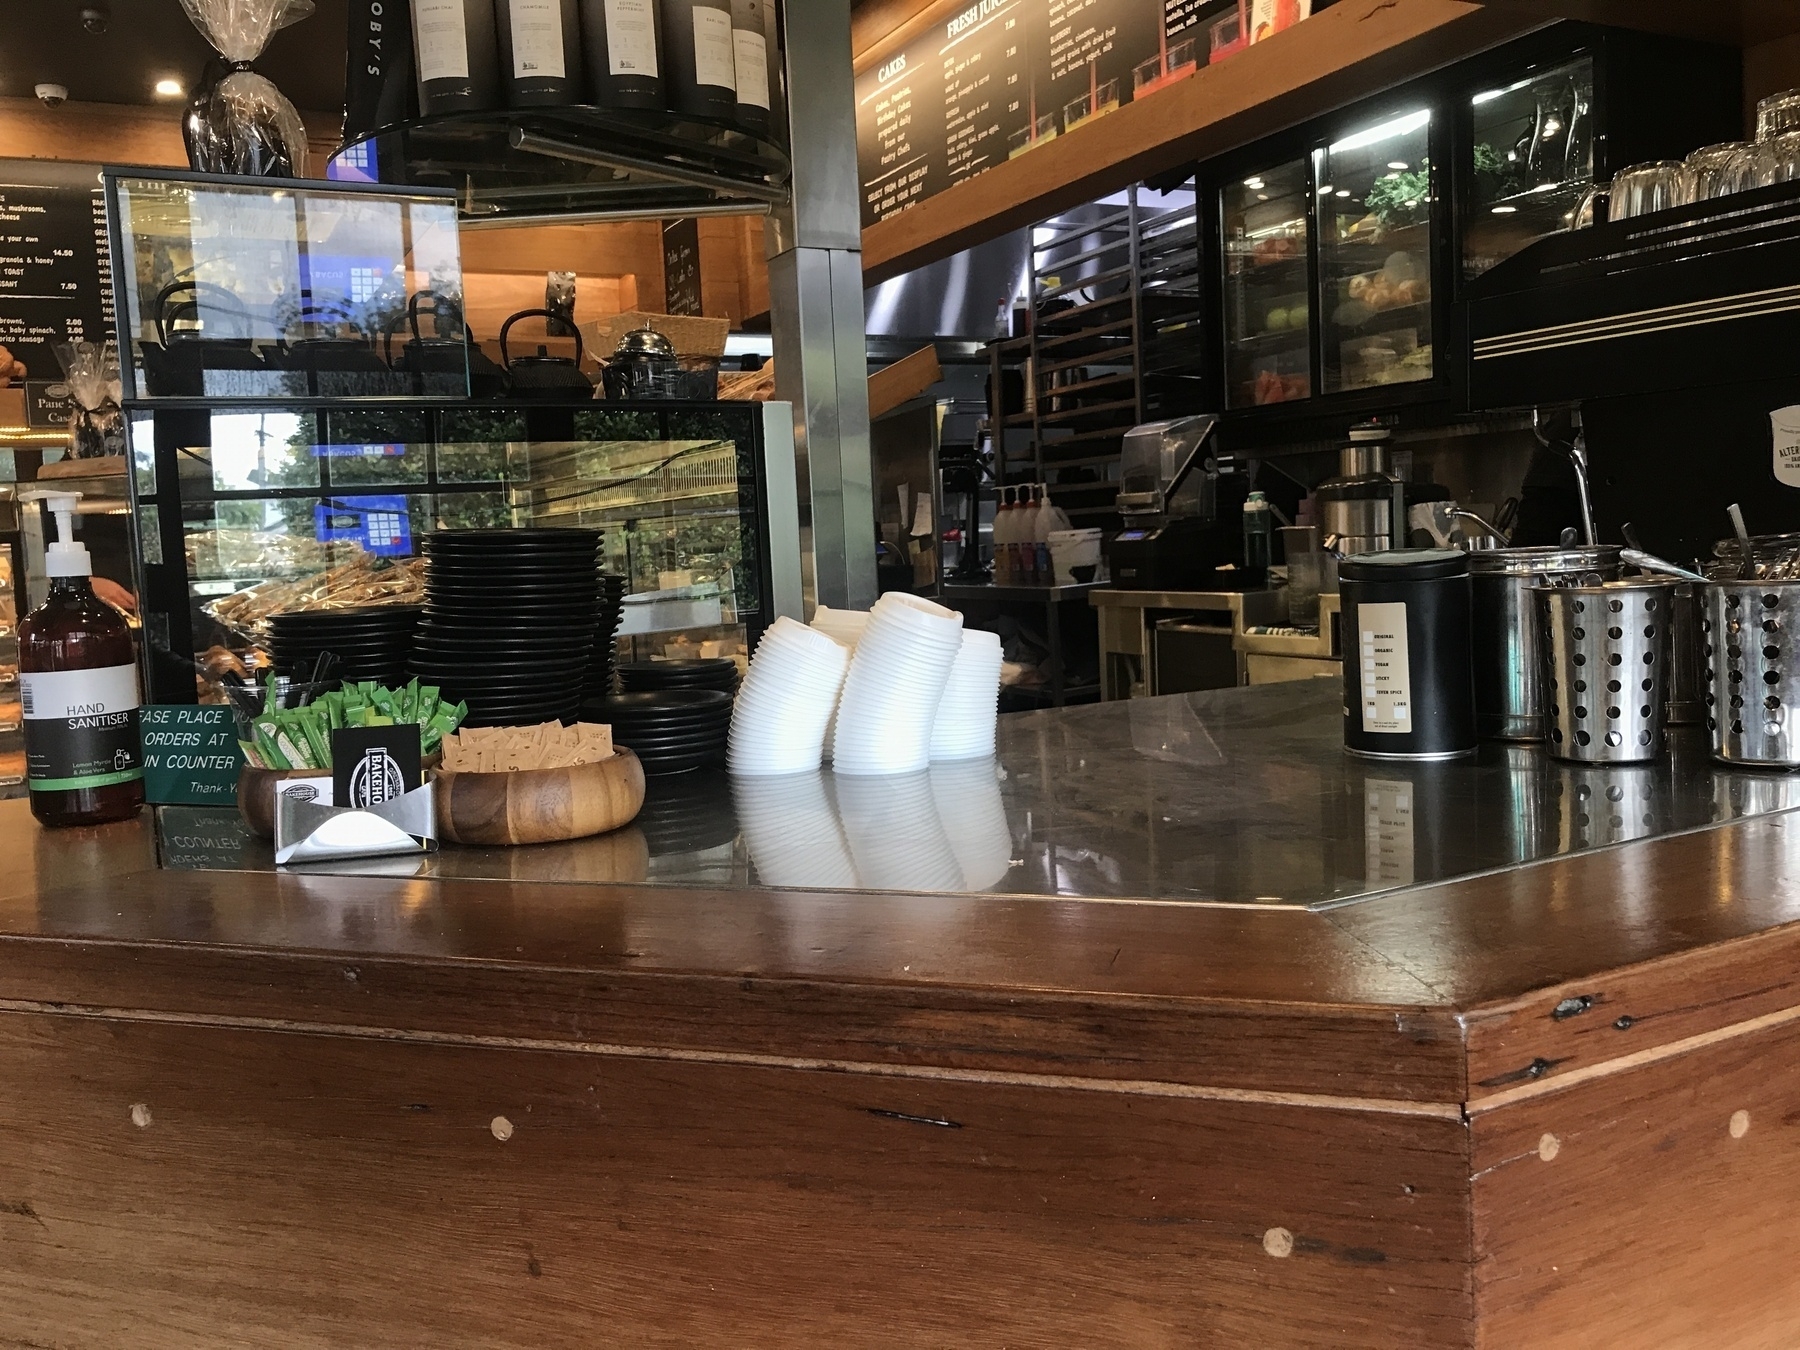 On a highly reflective cafe counter crowded with lids, business cards, wooden bowls, condiments, hand sanitiser and stainless steel containers, four close-packed piles of white throwaway coffee cup lids curve gracefully sideways, like plants reaching for the light. They are mirrored in the counter top.